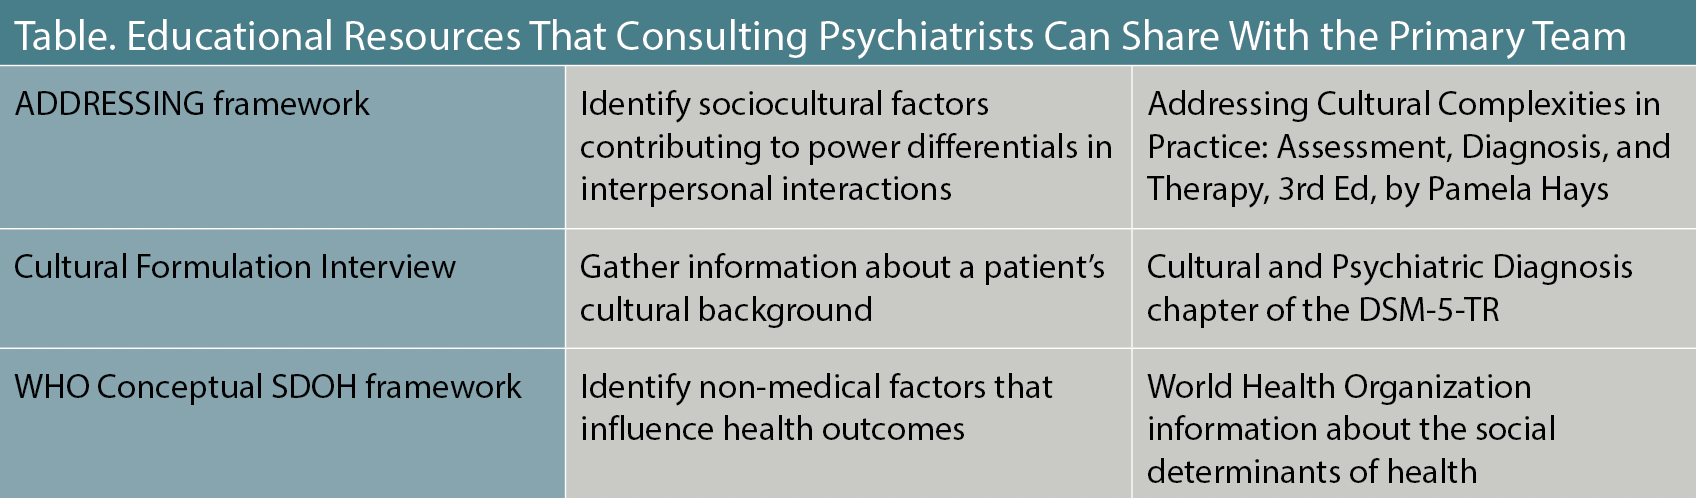 Table. Educational Resources That Consulting Psychiatrists Can Share With the Primary Team